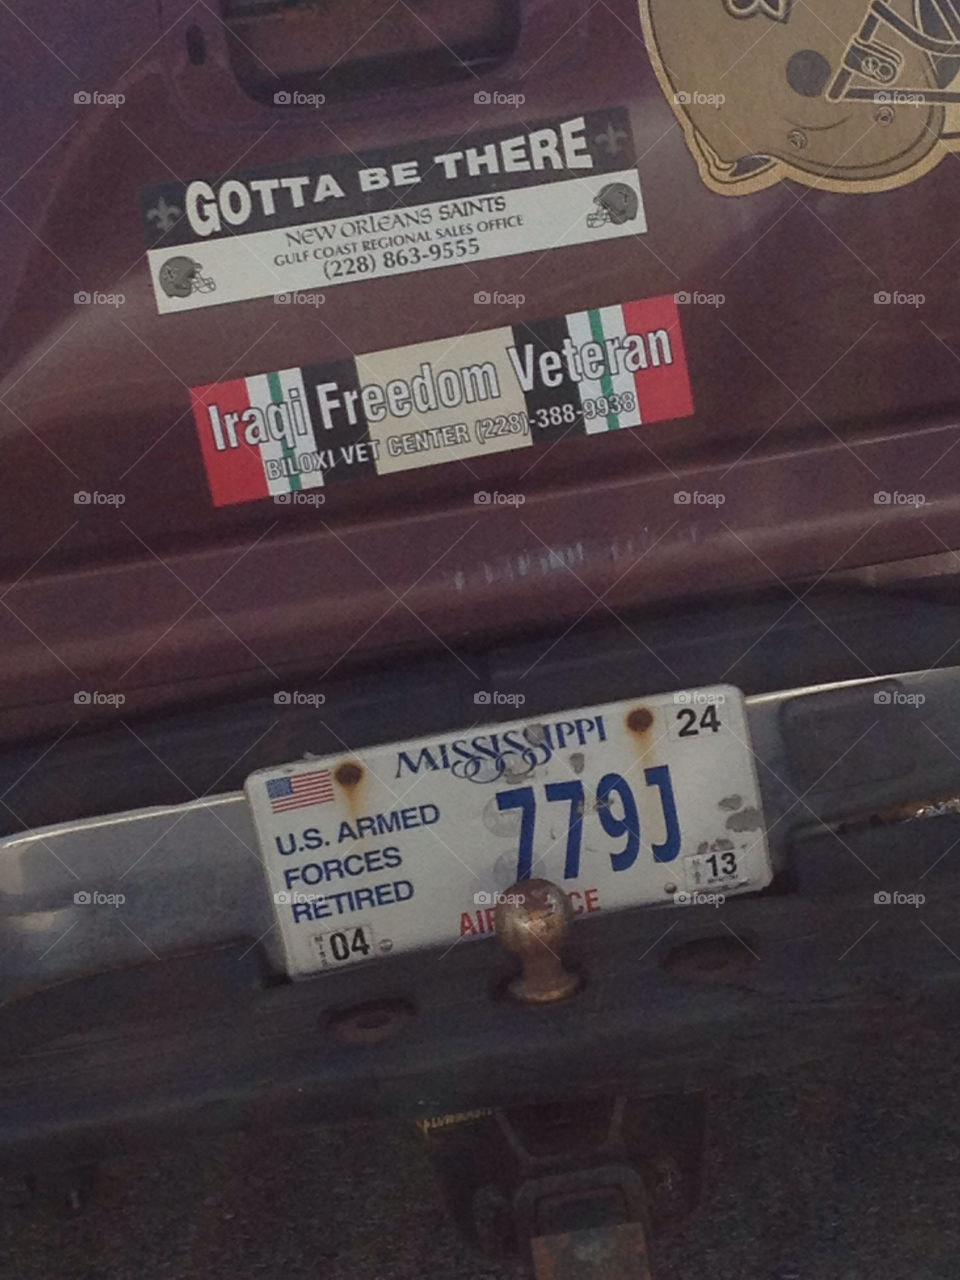 wal-mart old truck license plate bumper stickers by bethos